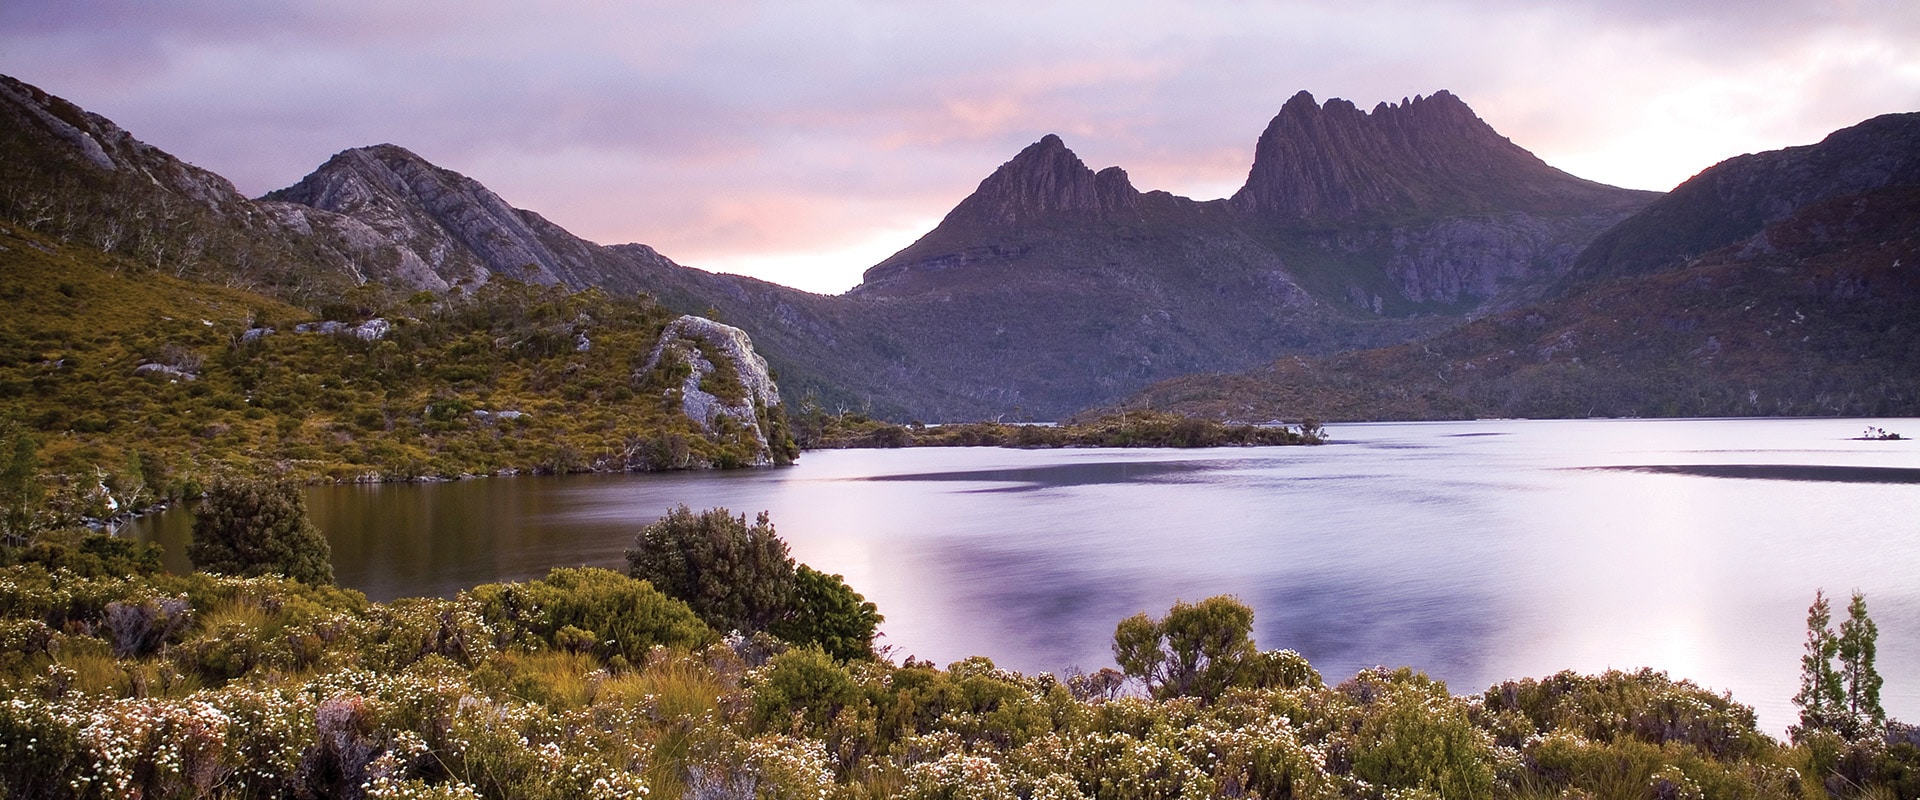 View of Cradle Mountain with lake in foreground, Tasmania